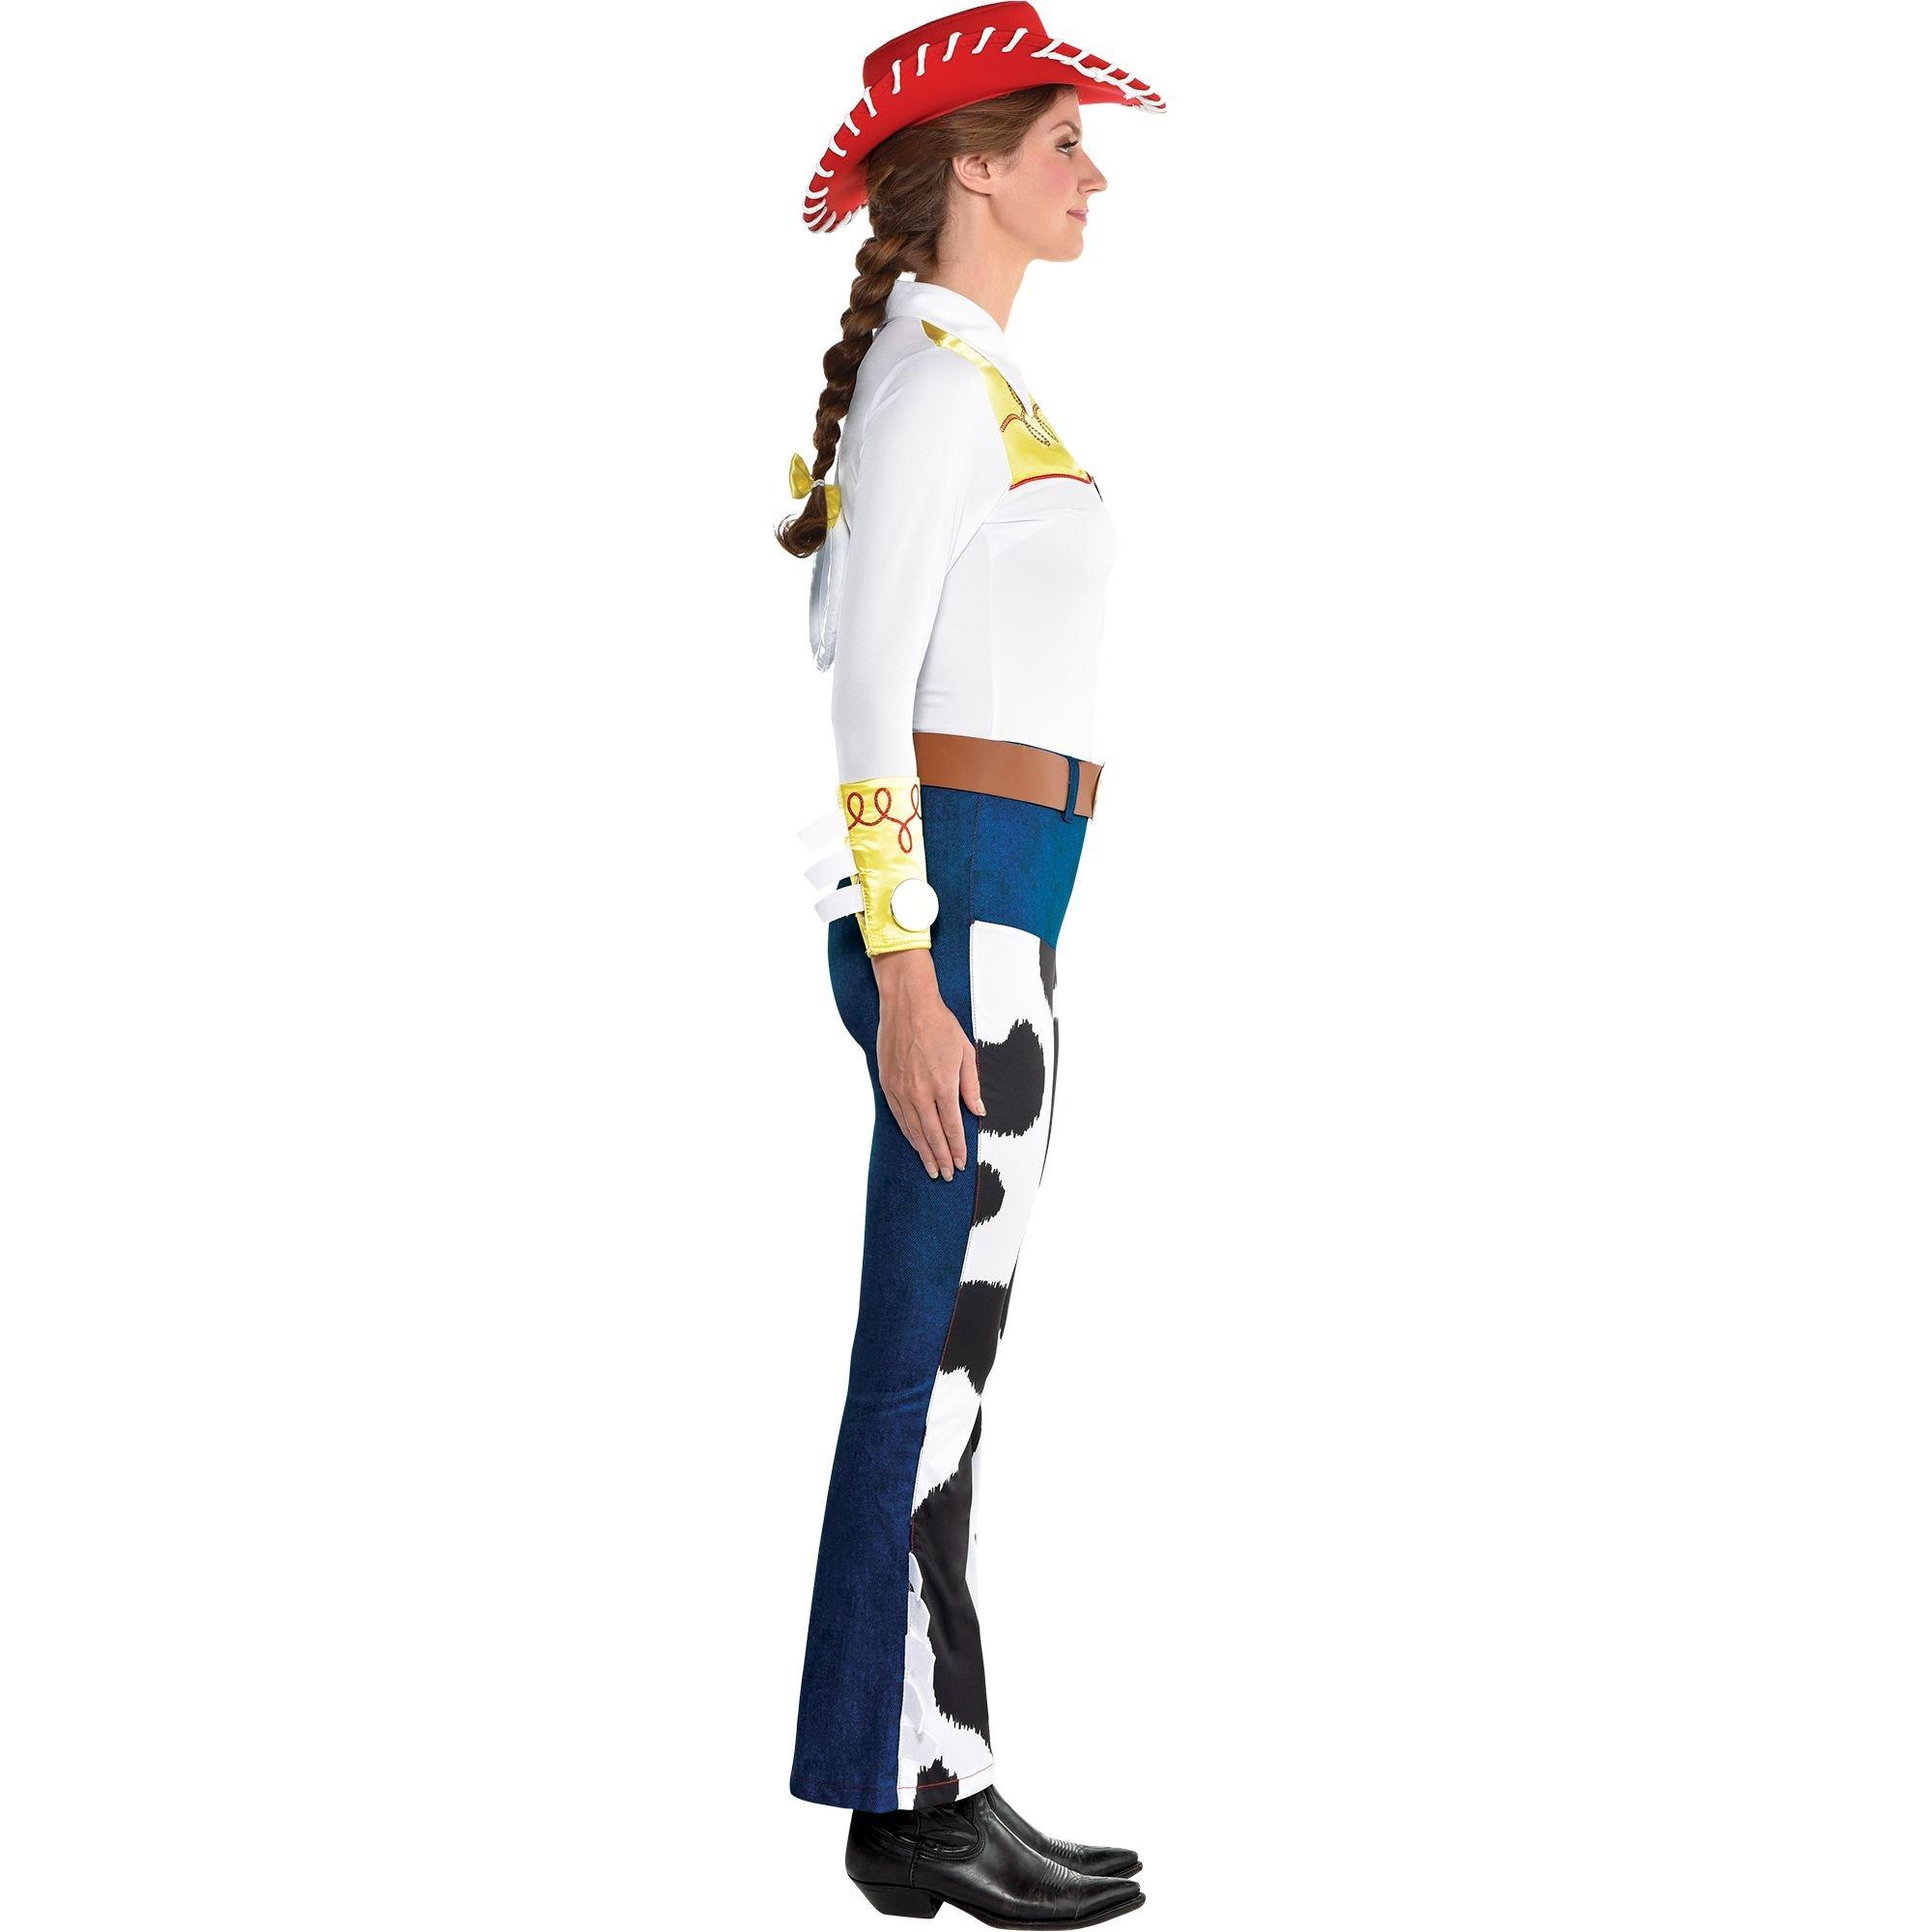 Adult Jessie Deluxe Costume Toy Story 4 Party City 8055